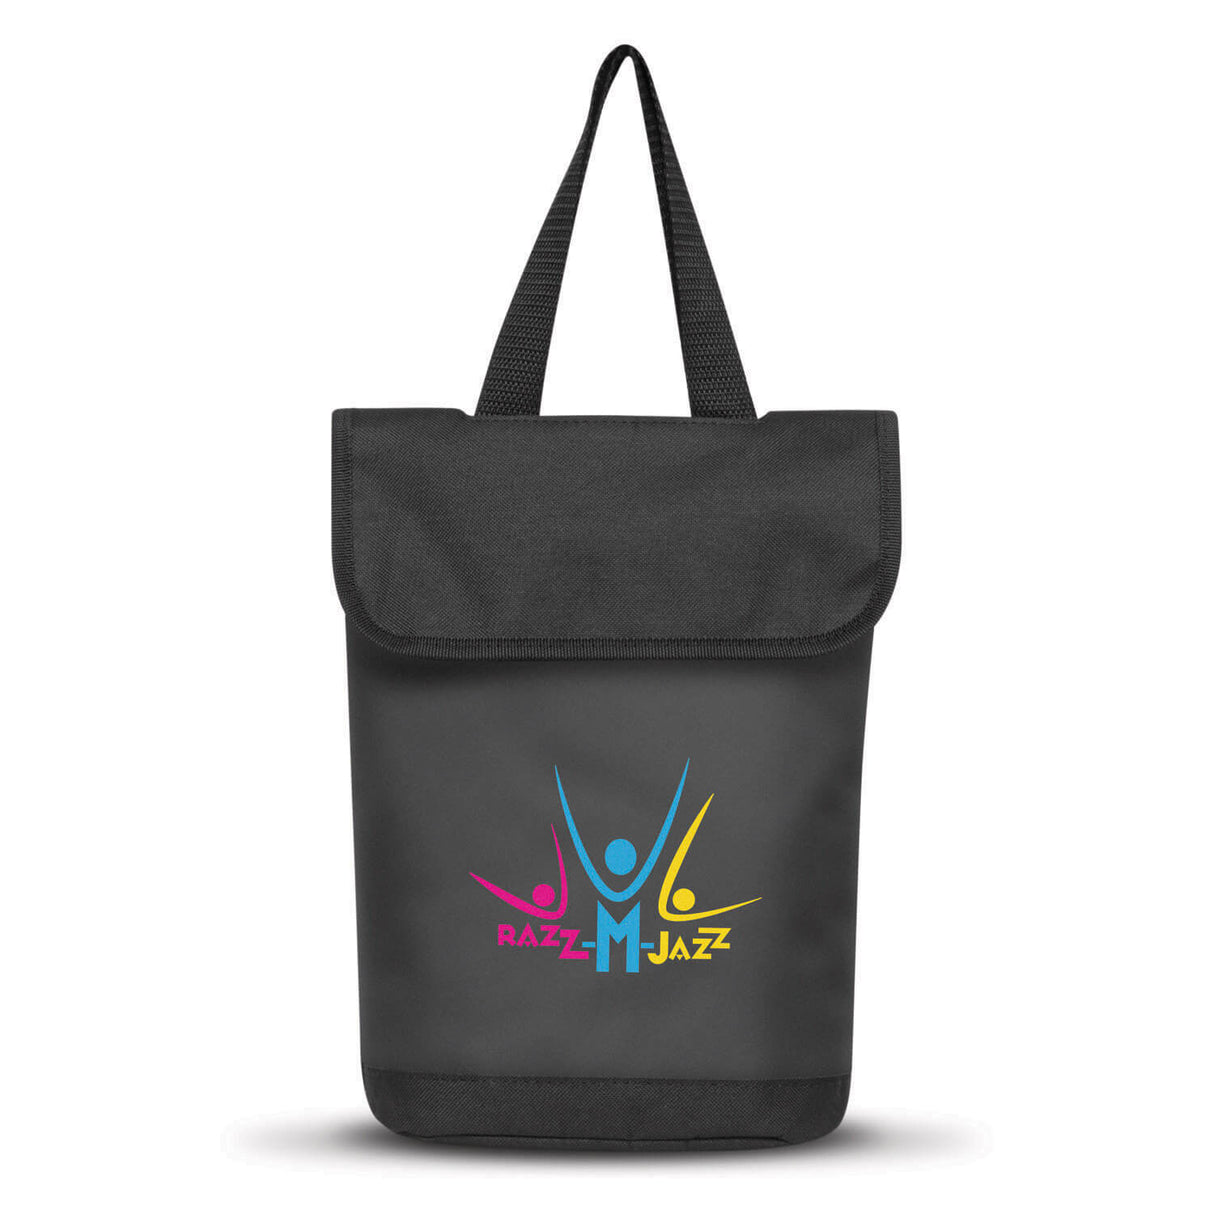 Double Wine Cooler Bag - Printed